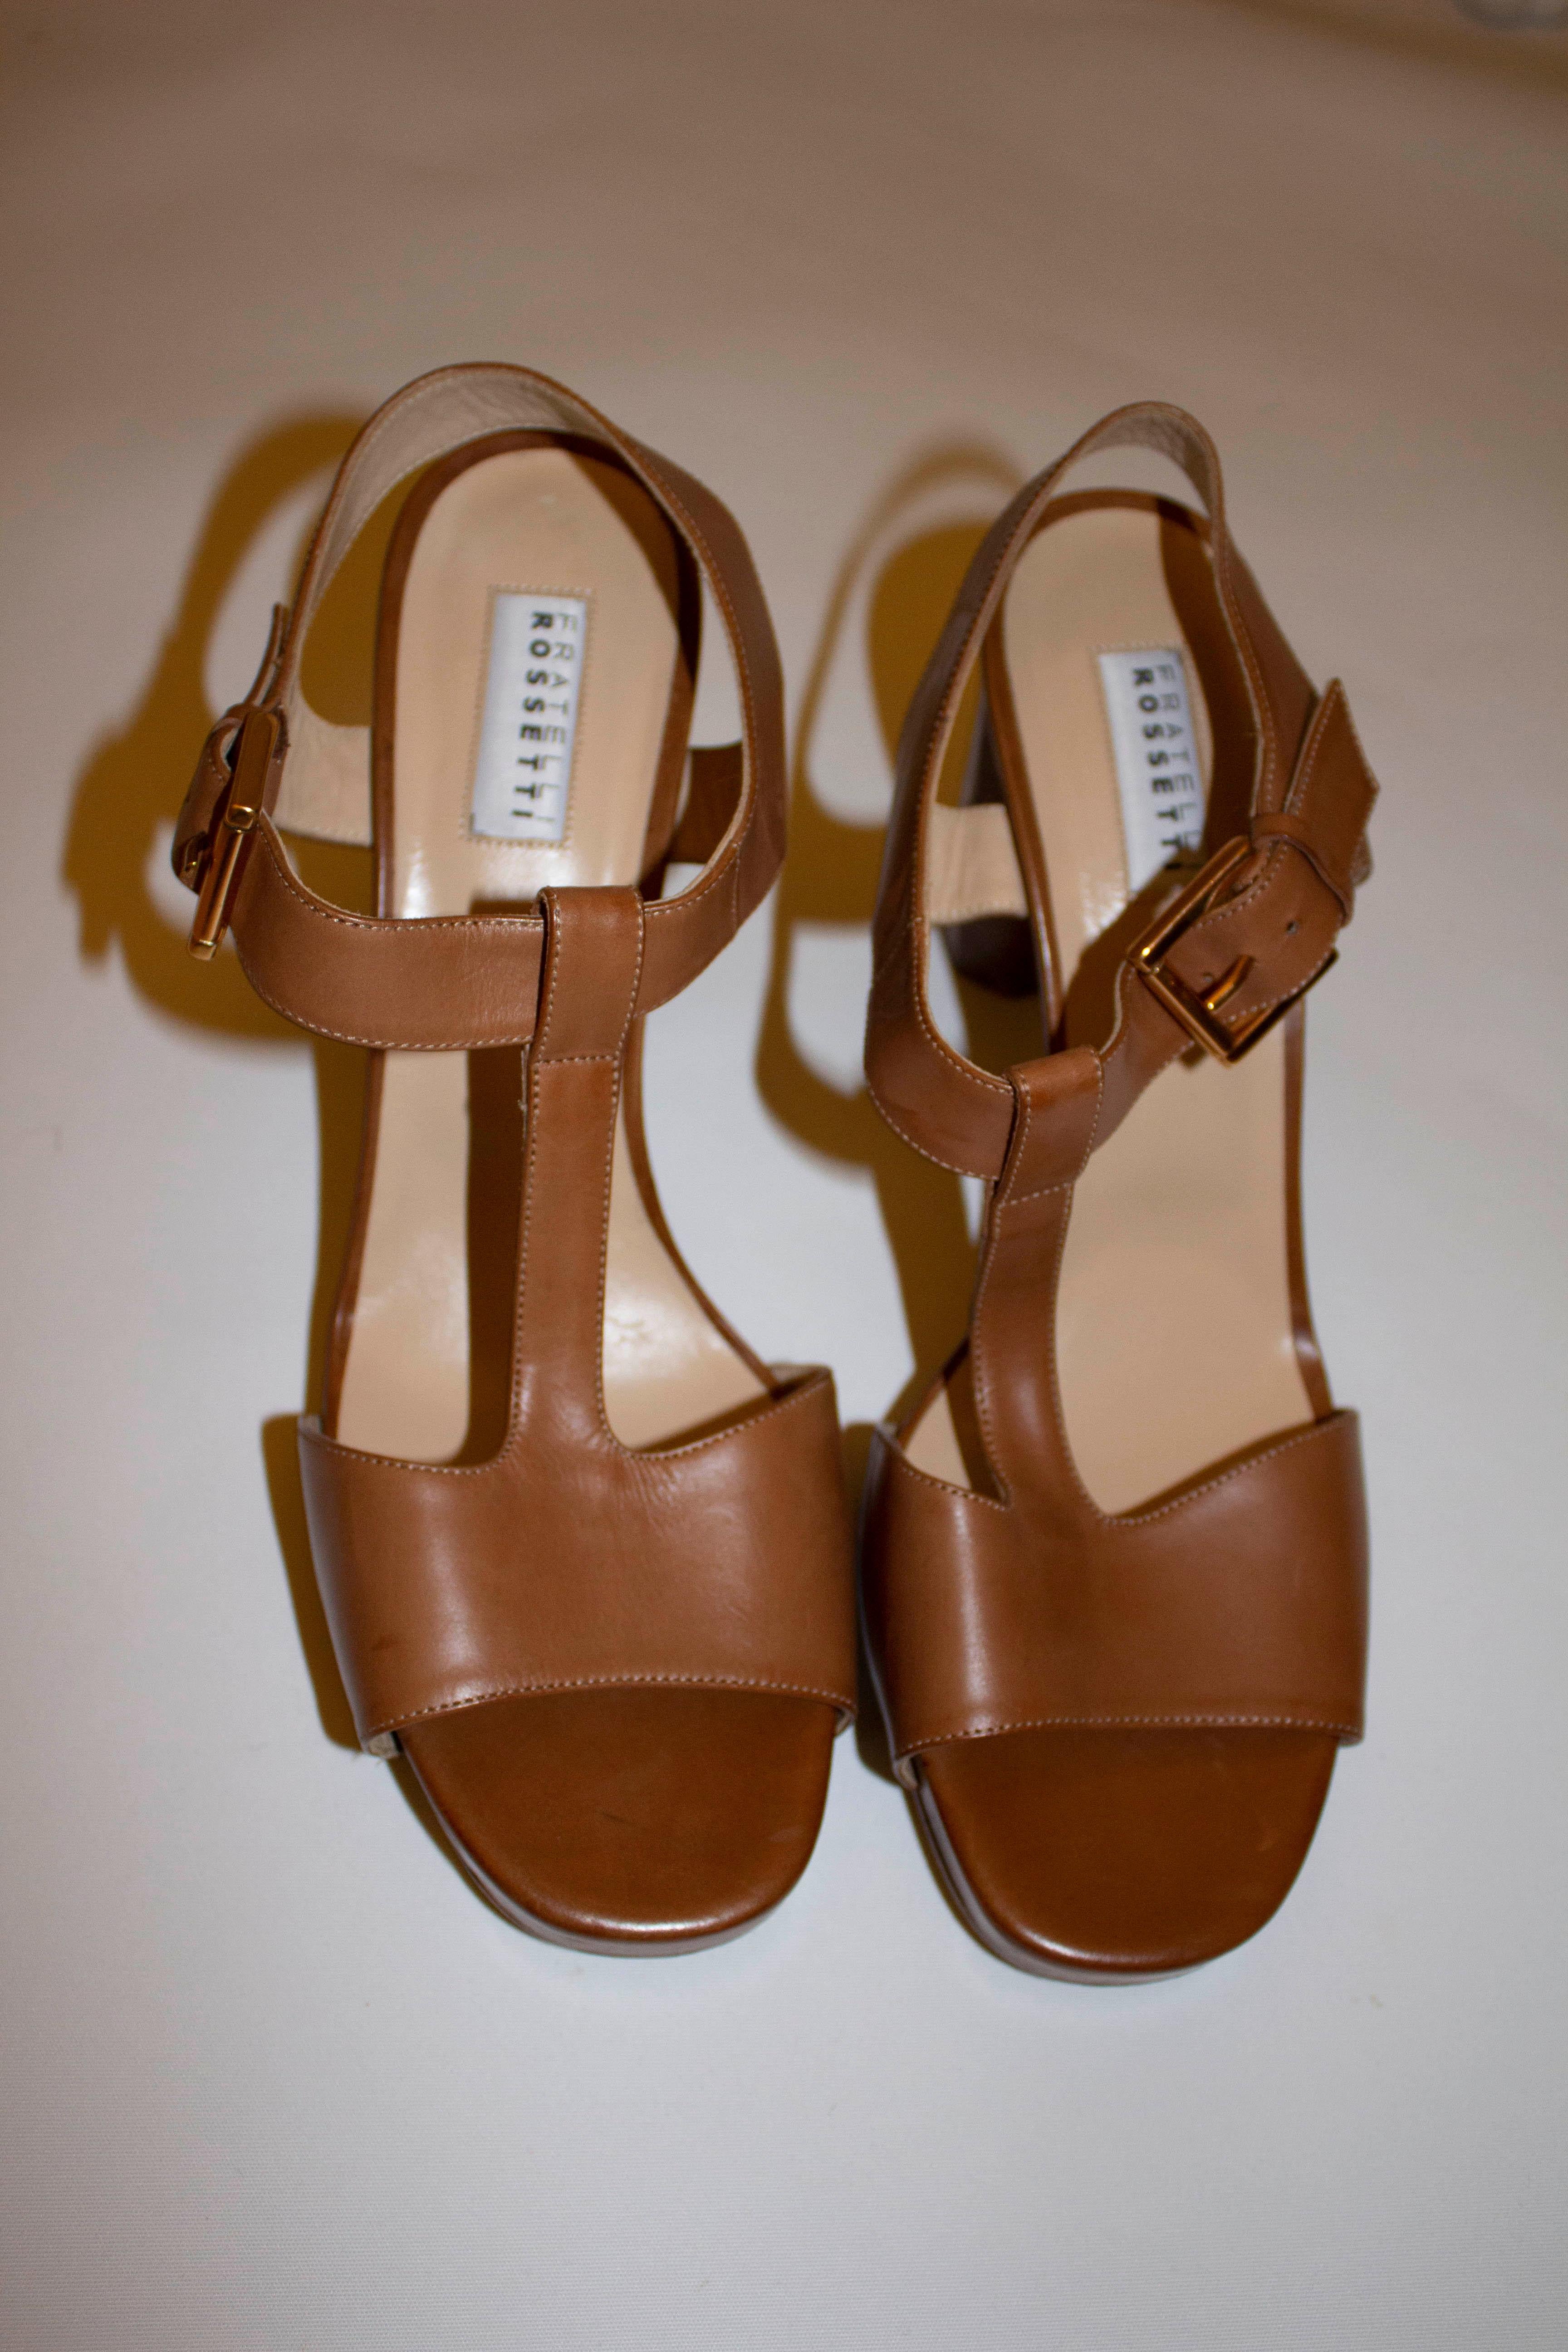 Brown Chic Tan Sandles by Fratelli Rossetti Size 39 Unworn For Sale